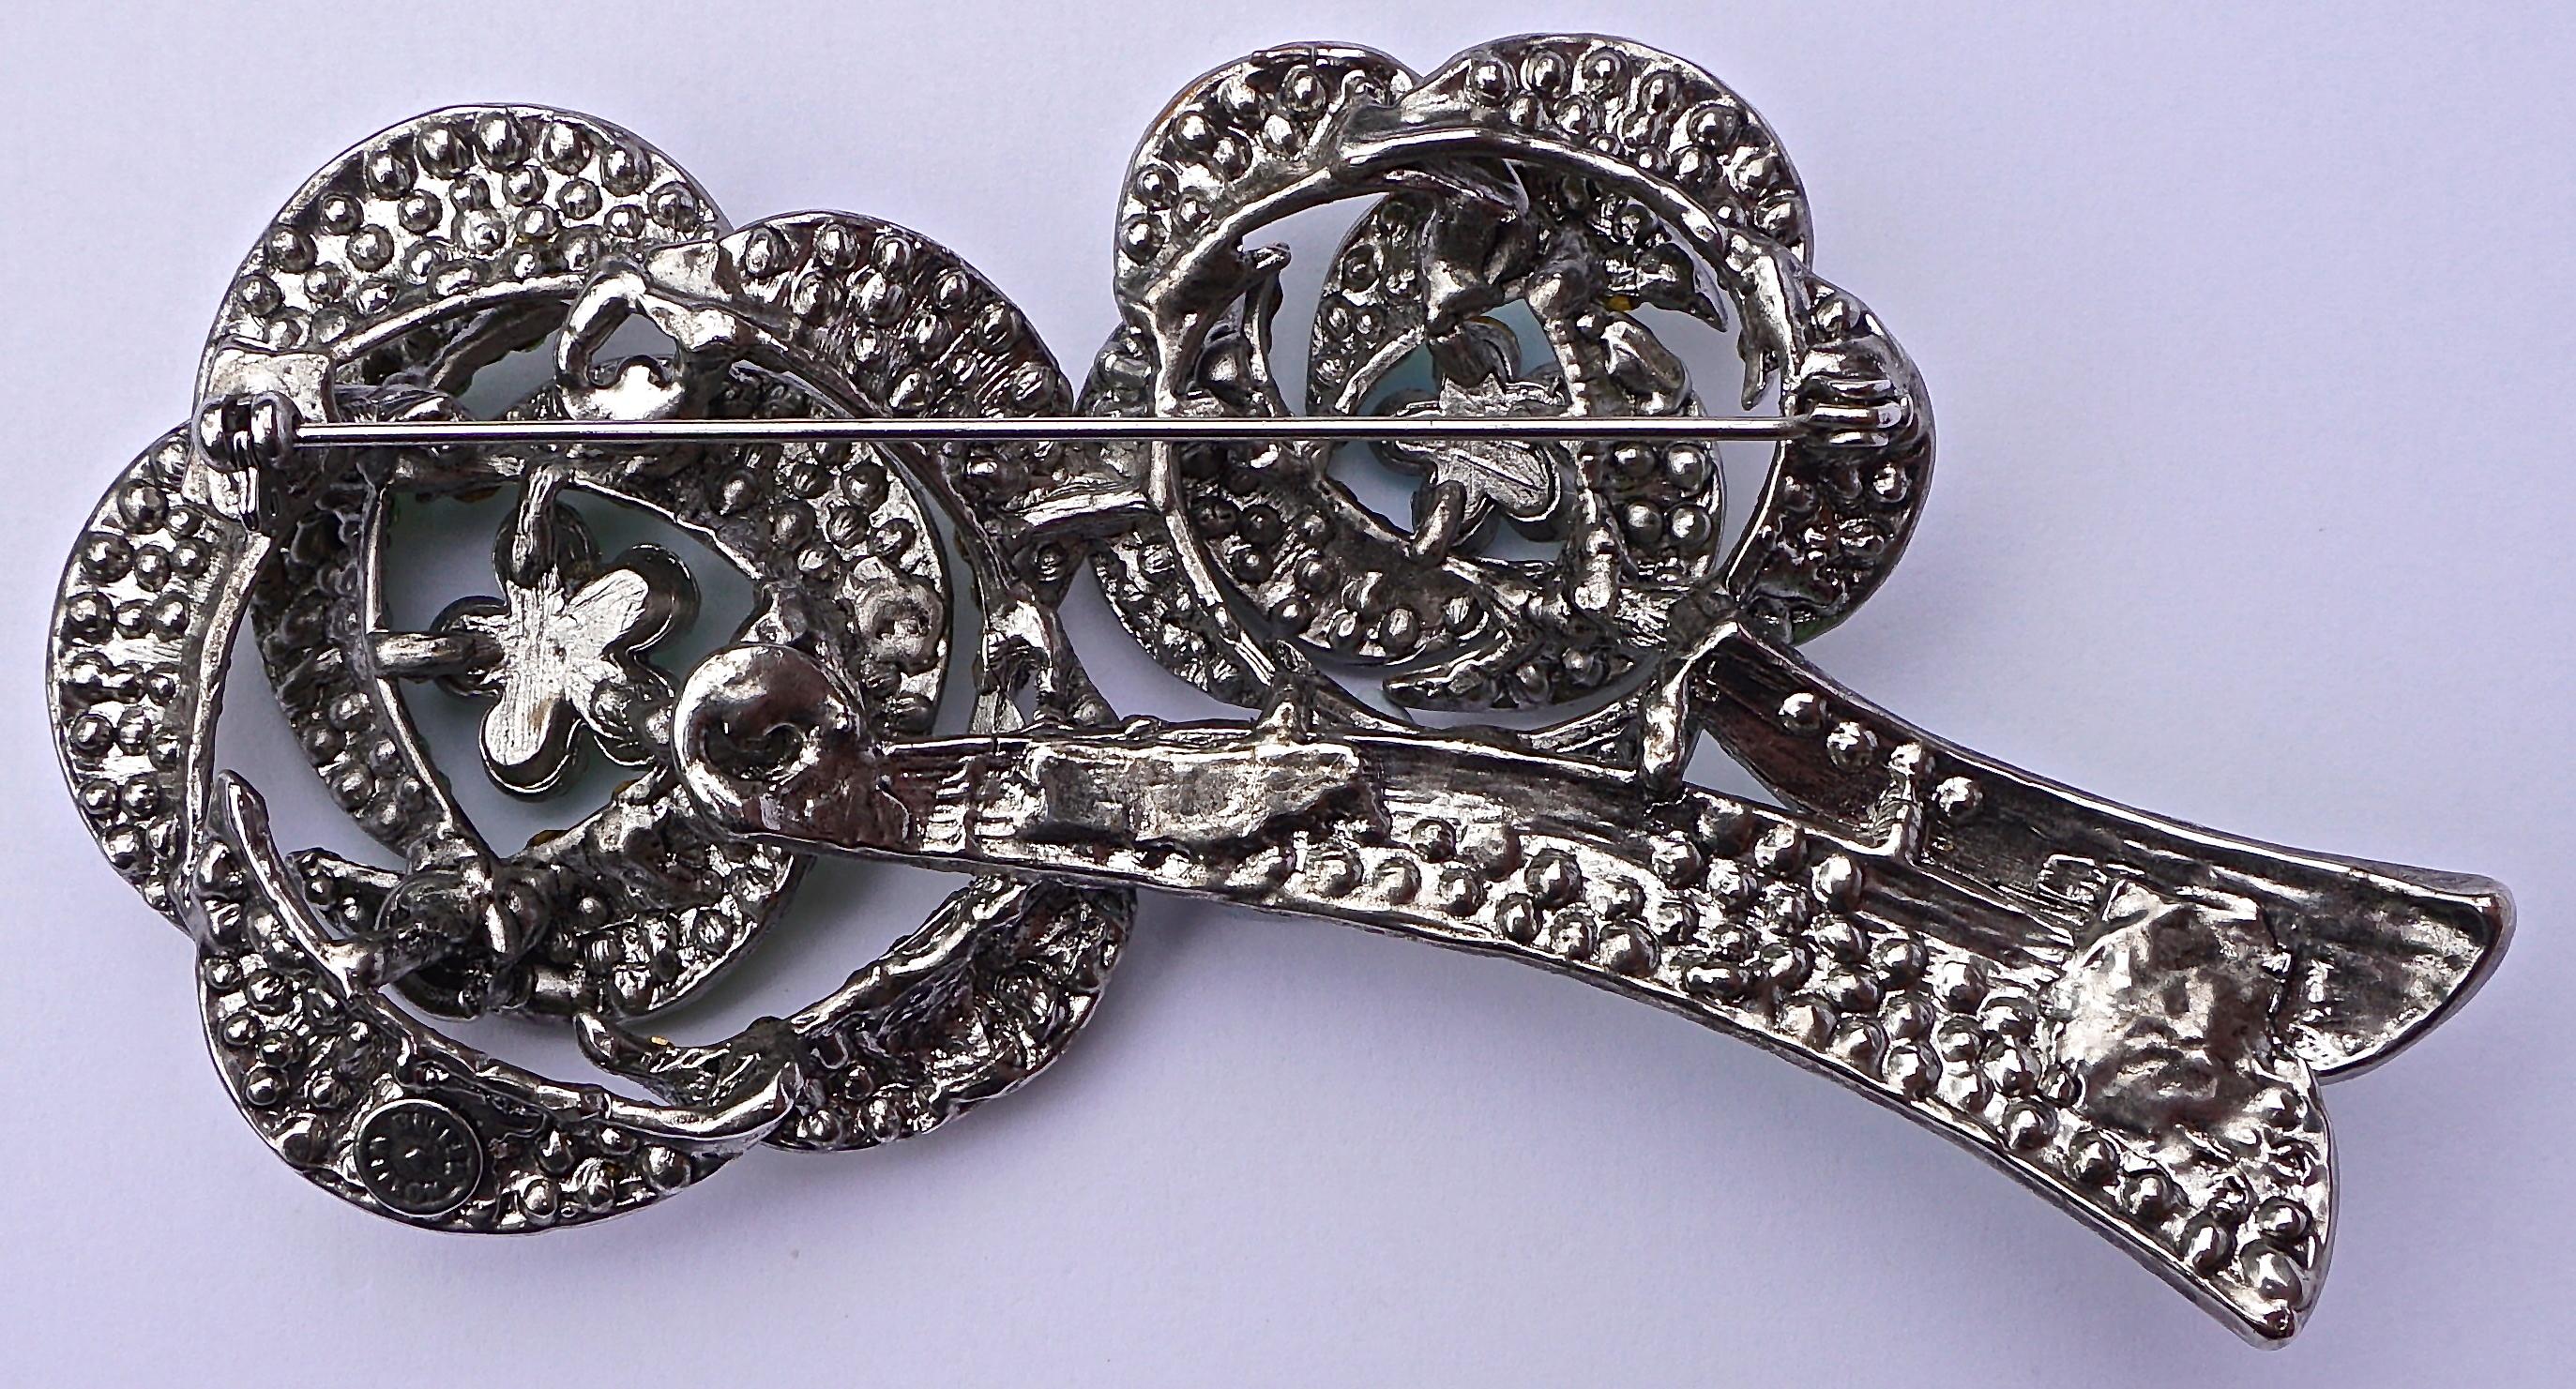 Butler & Wilson large vintage double flower brooch with two shades of sparkling green and aurora borealis rhinestones set in silver tone metal. Measuring length 10.4 cm / 4.09 inches, and the larger flower measures 4.8cm / 1.89 inches across.

This